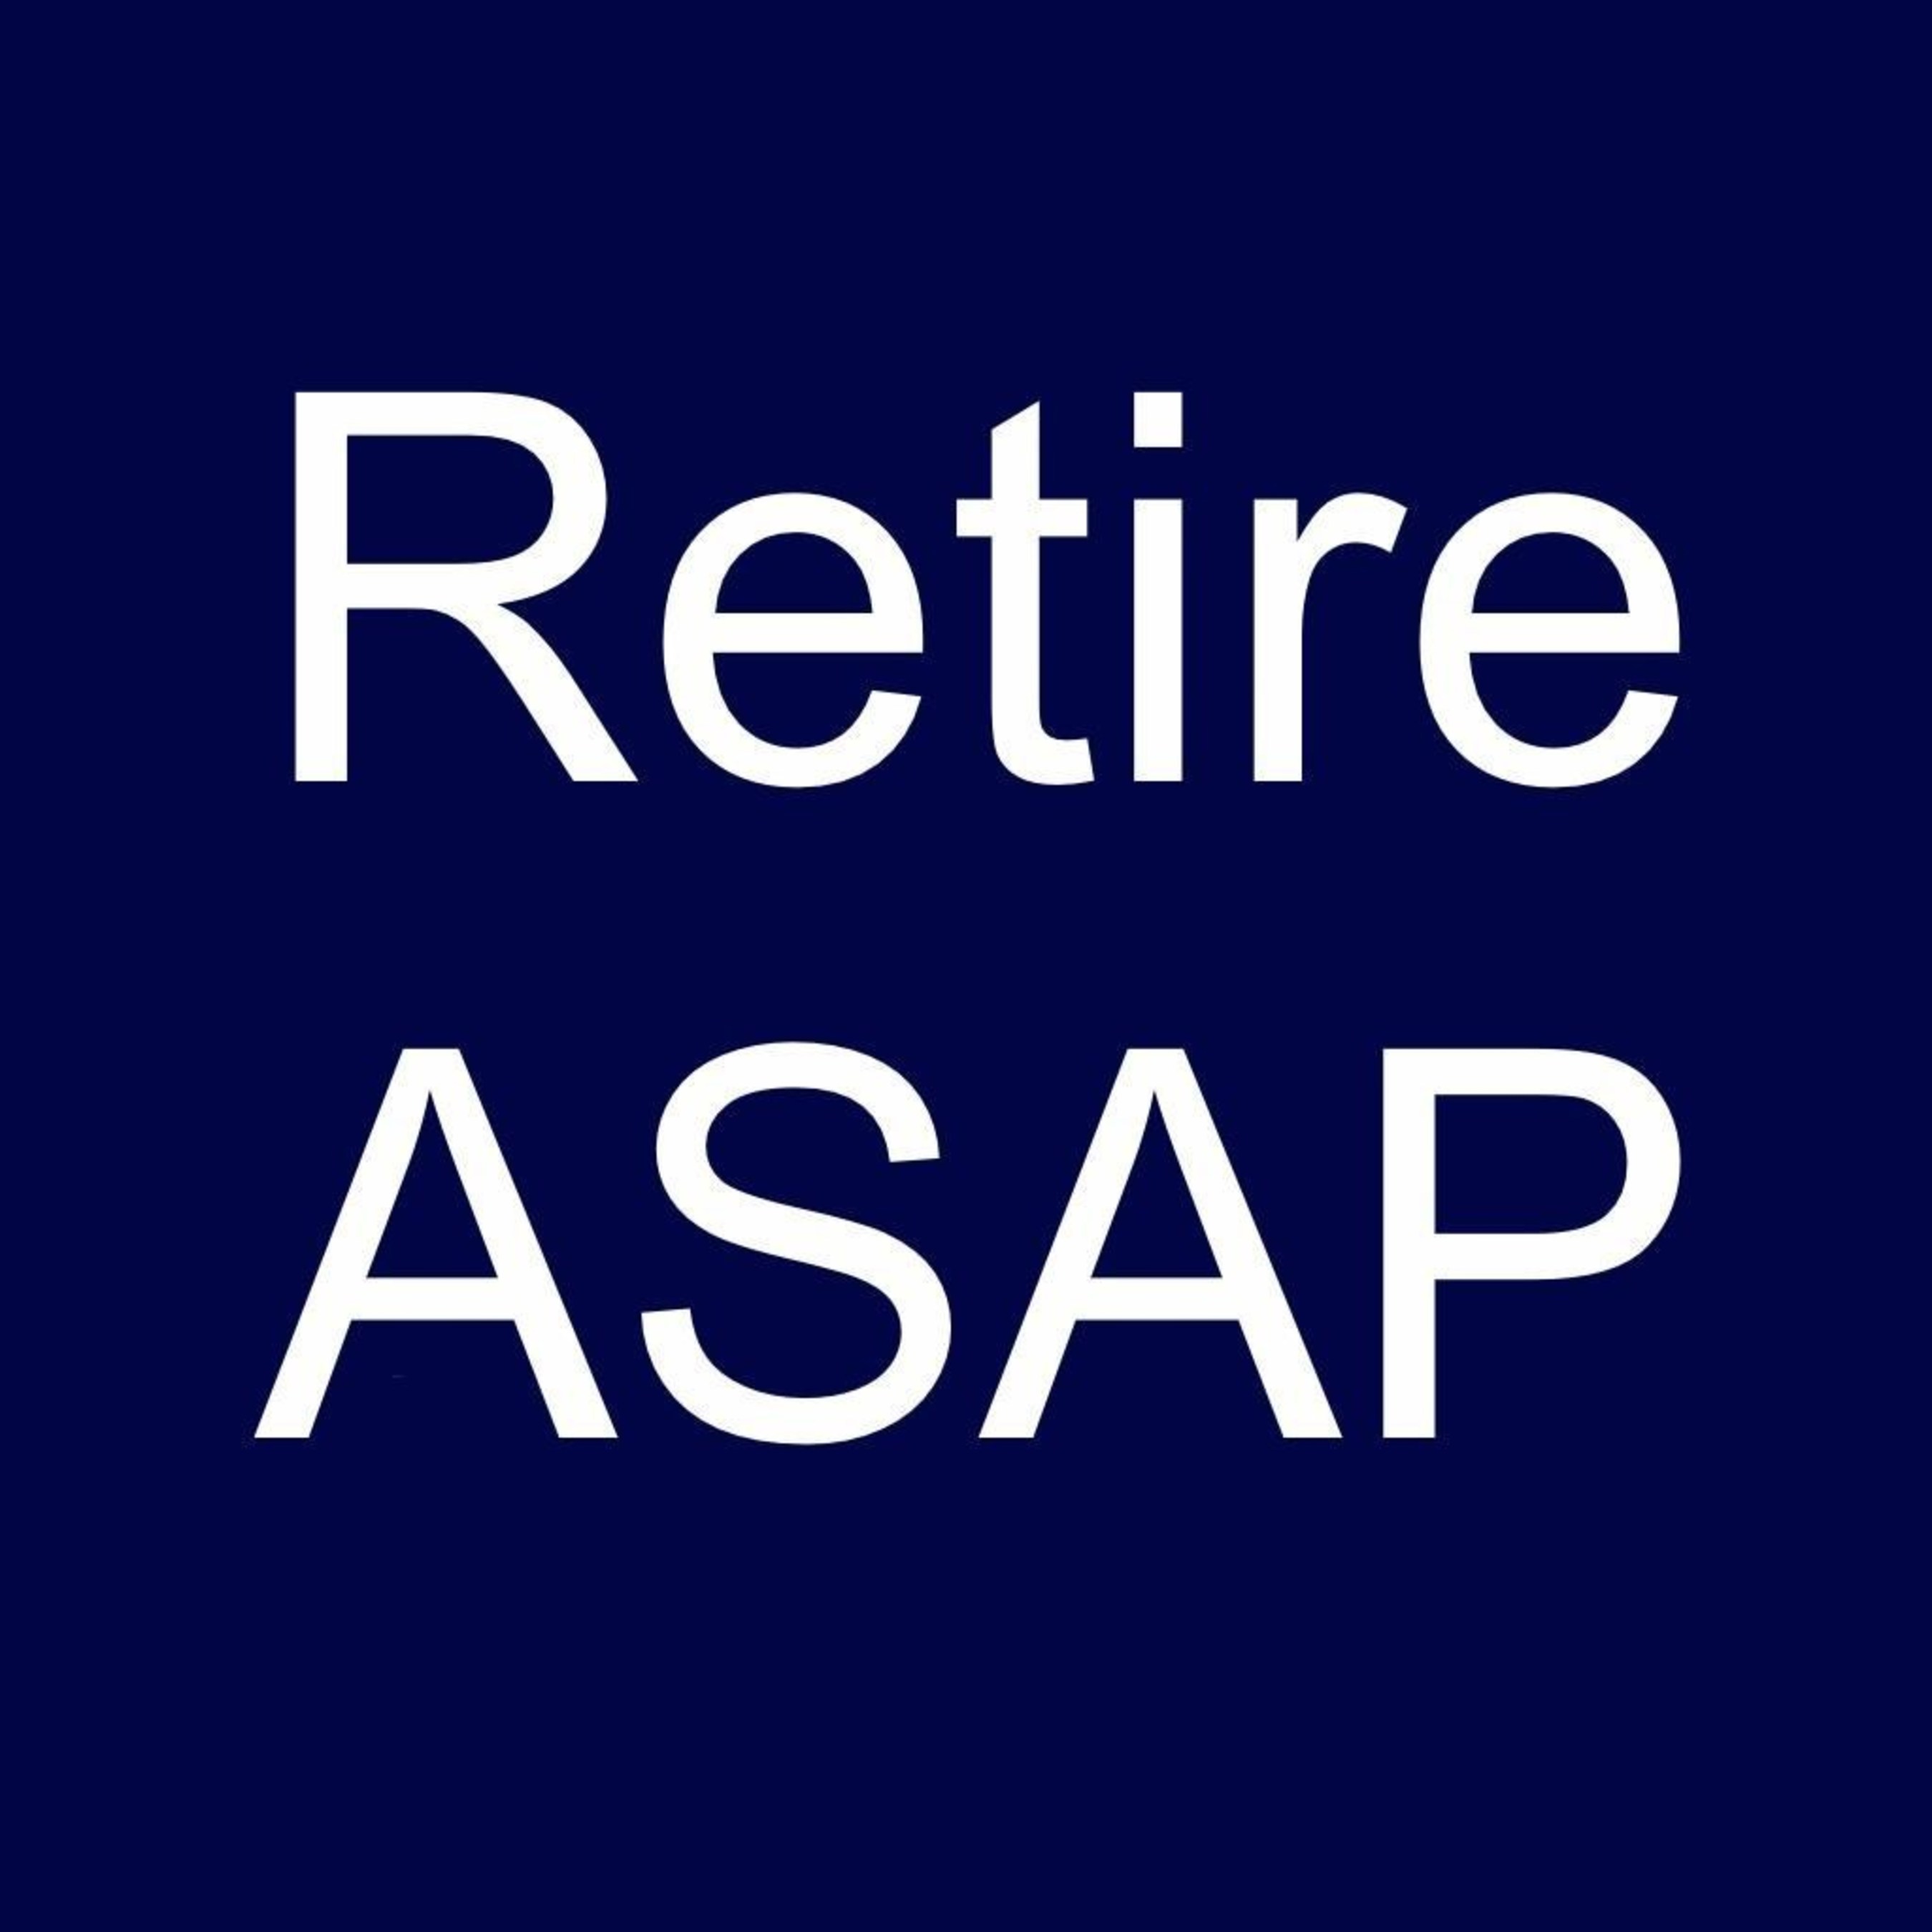 From the creator of "I Want to Be a Millionaire," the new app "I Want to Retire ASAP" creates retirement plans in just minutes.